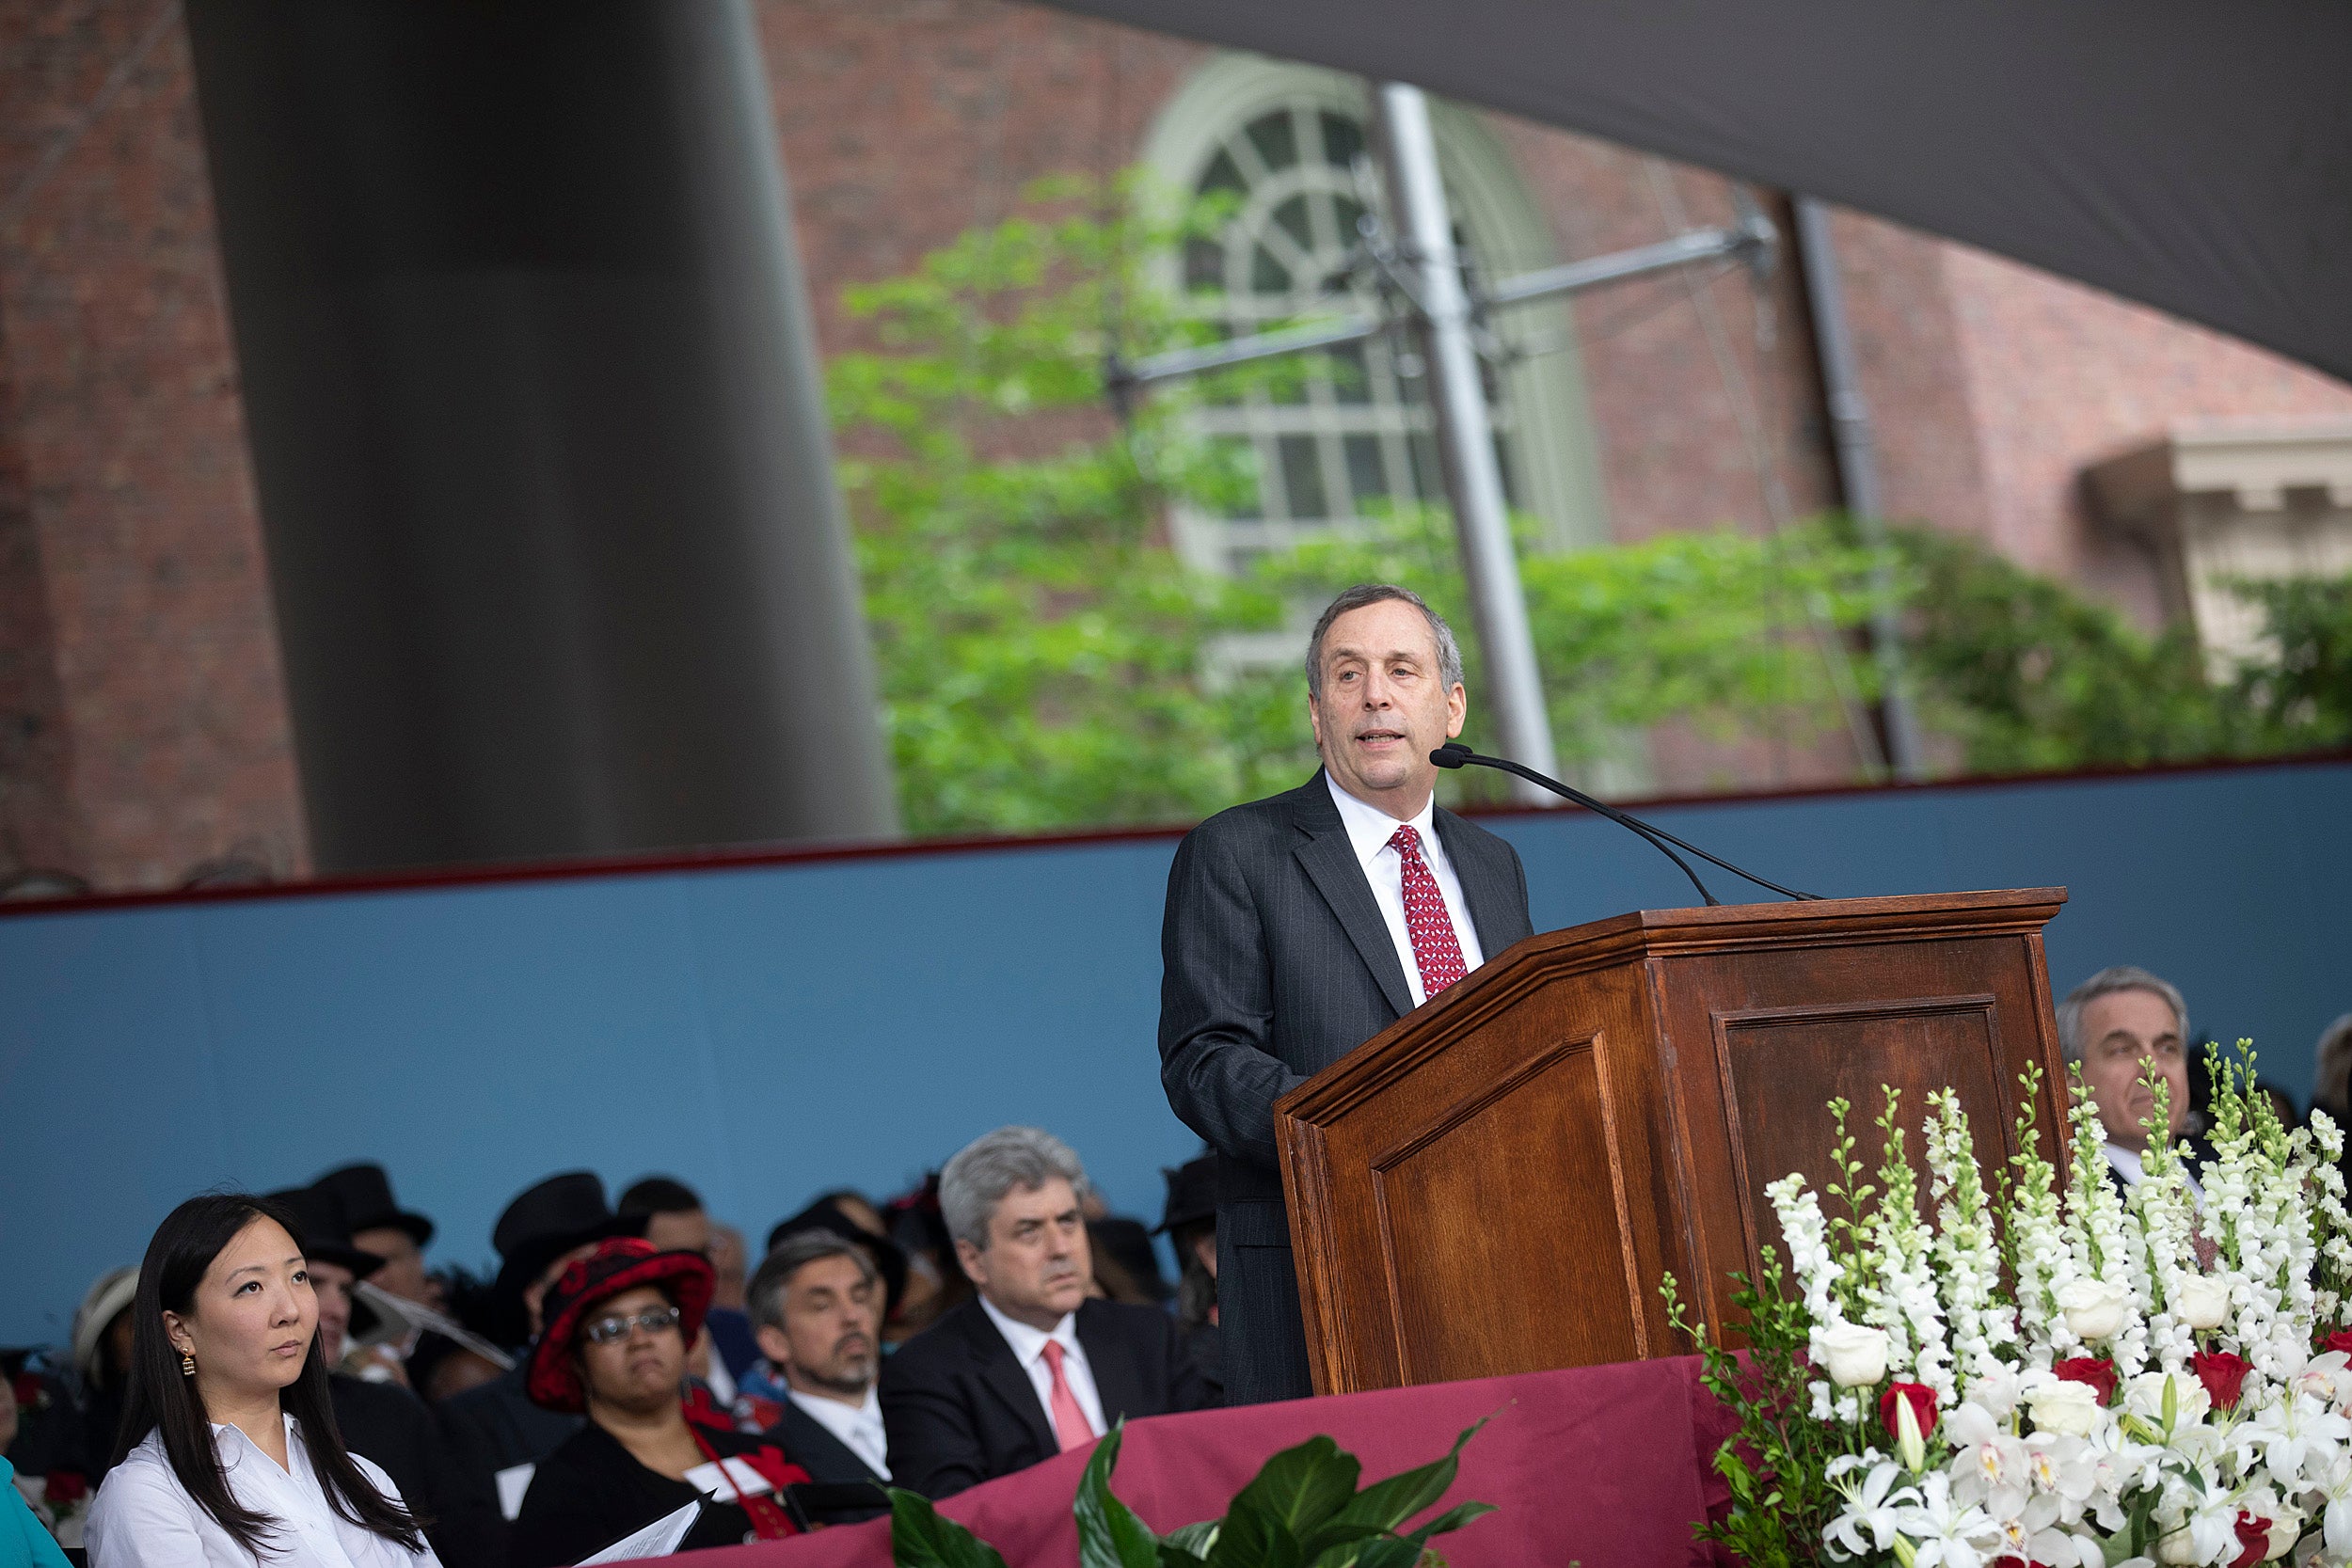 President Larry Bacow speaks at the Afternoon Program.